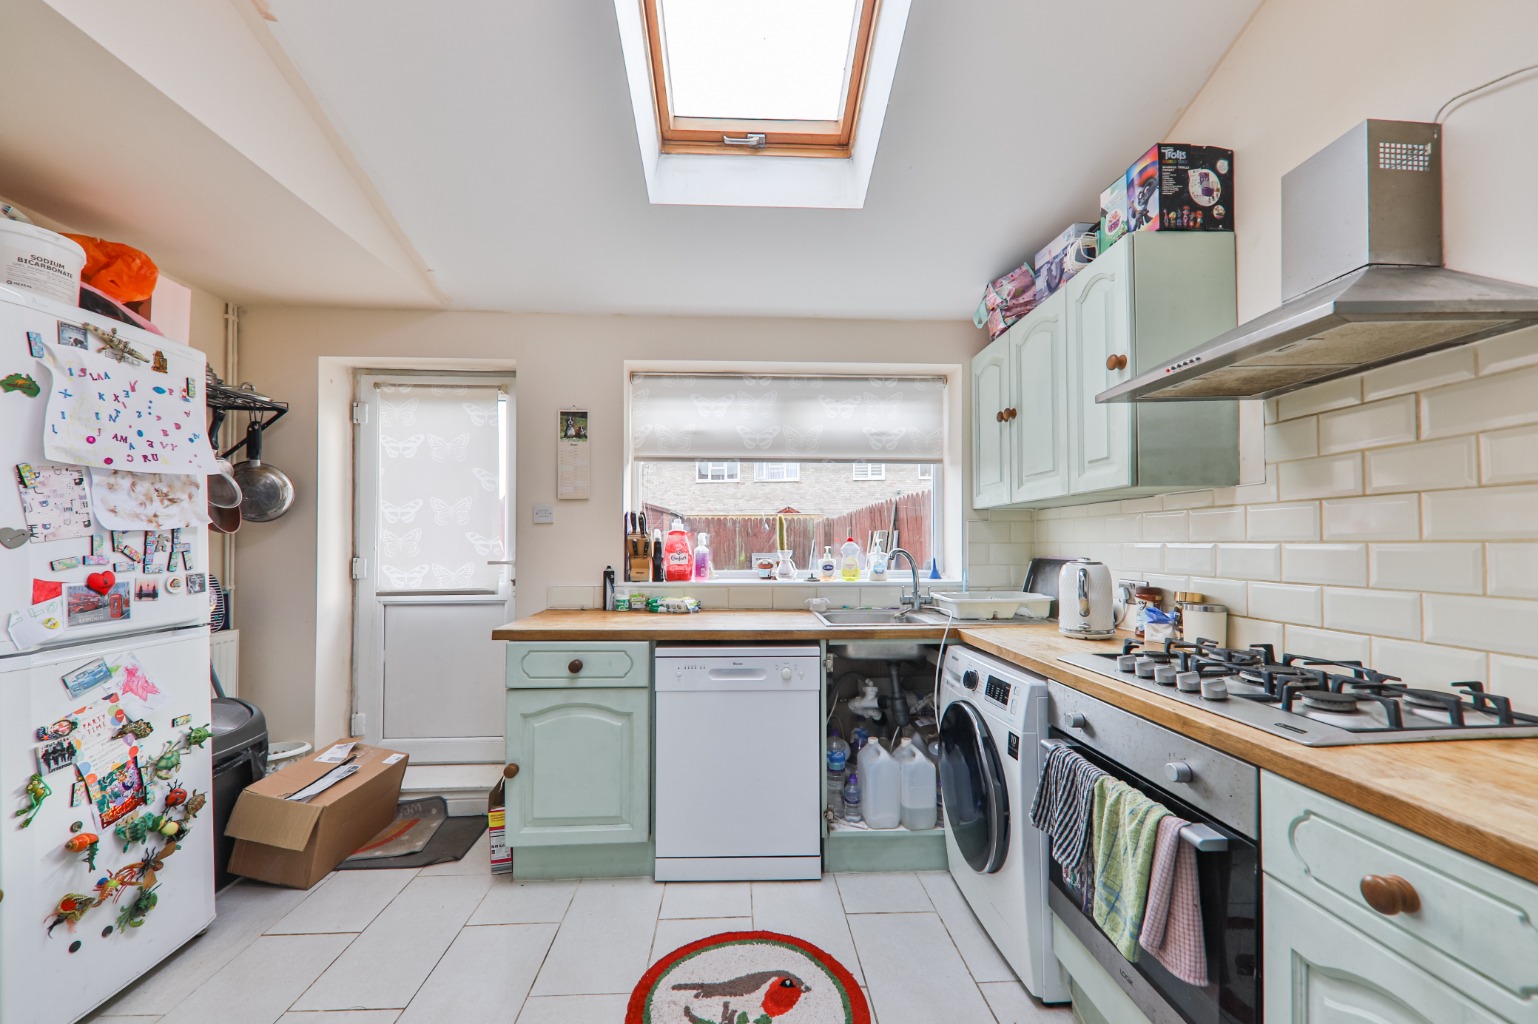 4 bed terraced house for sale - Property Image 1